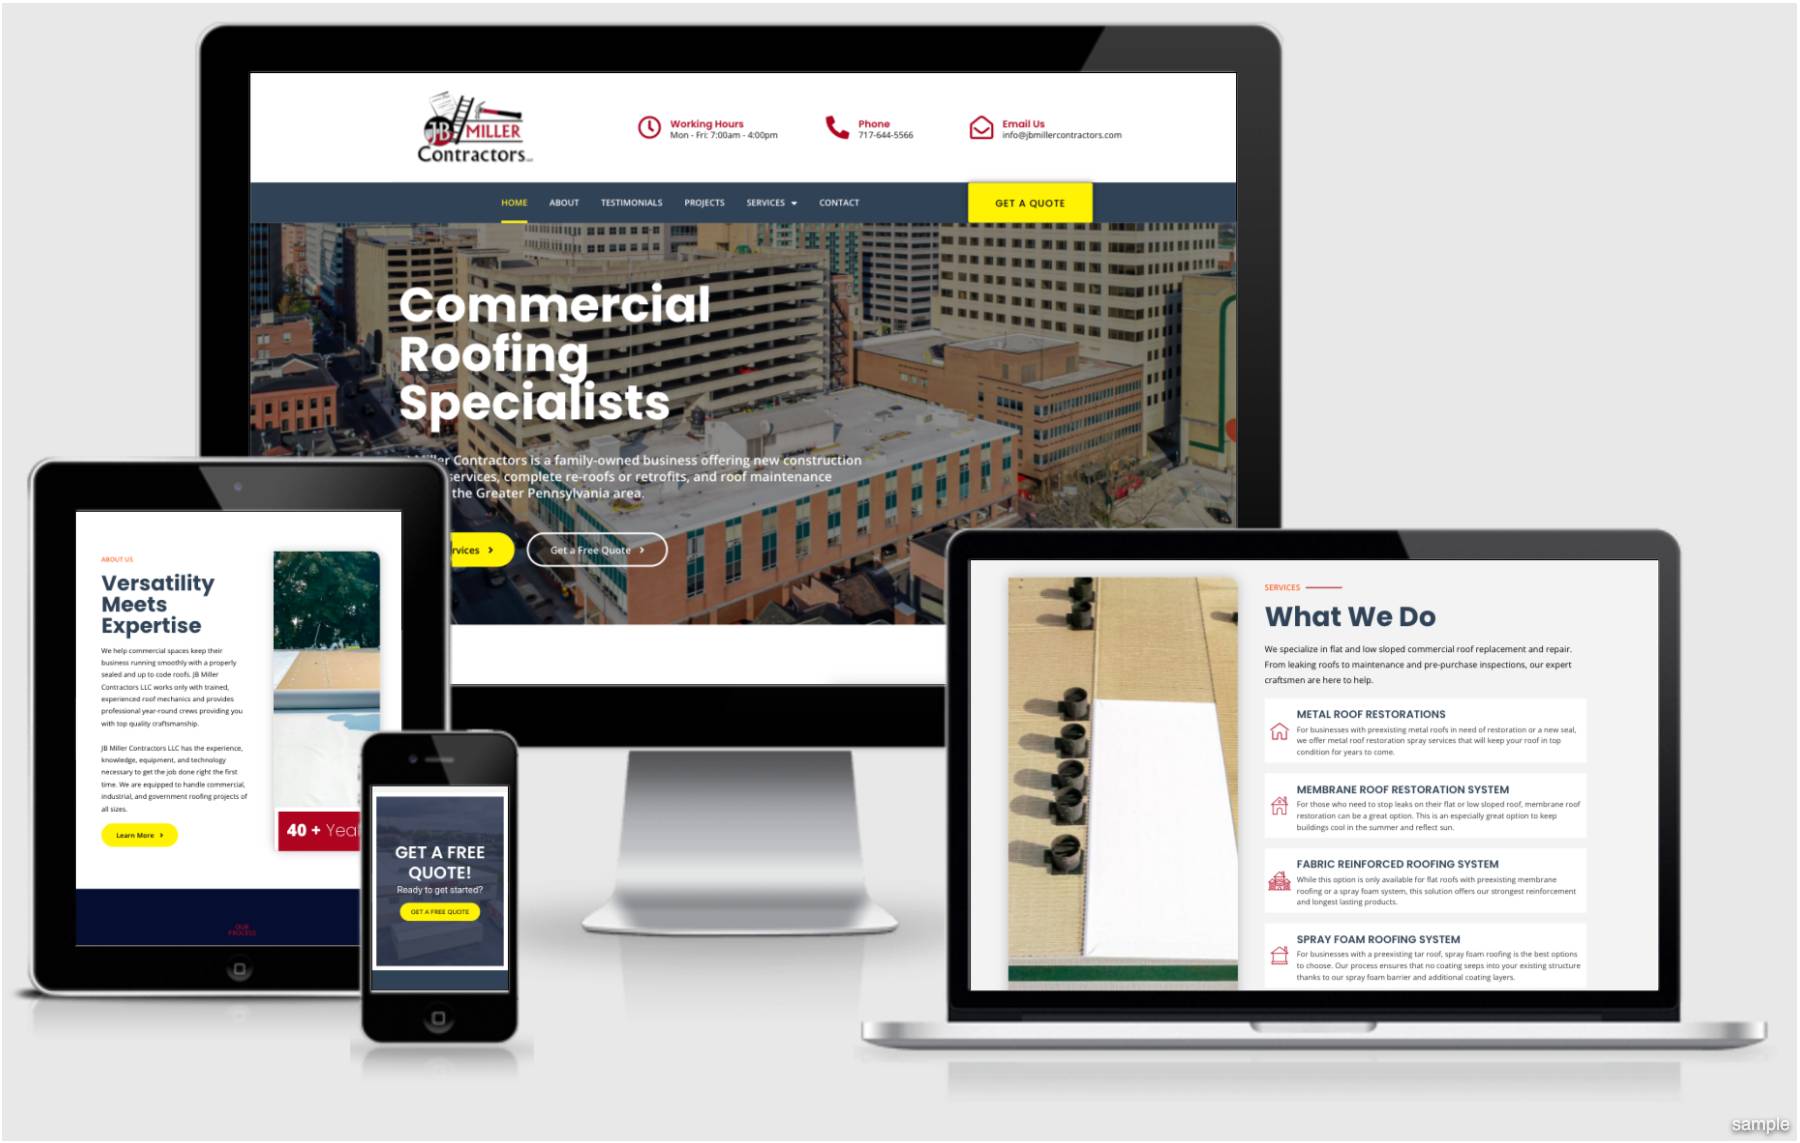 launch-kits-roofing company-websites-004